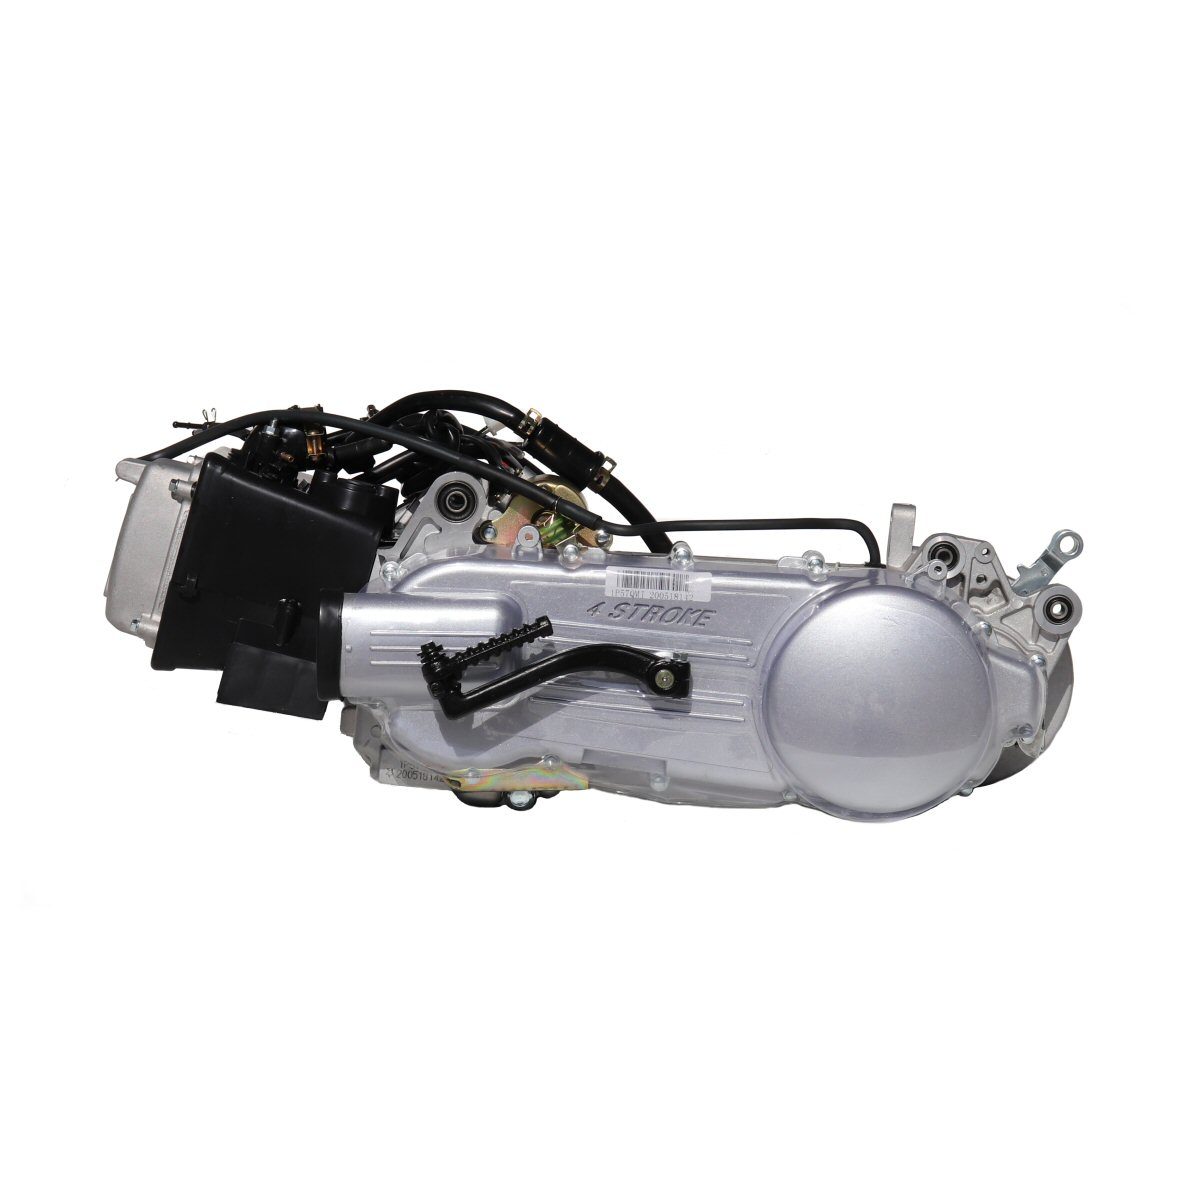 Universal Parts 150cc GY6 4-stroke Long-Case Engine – Scooters